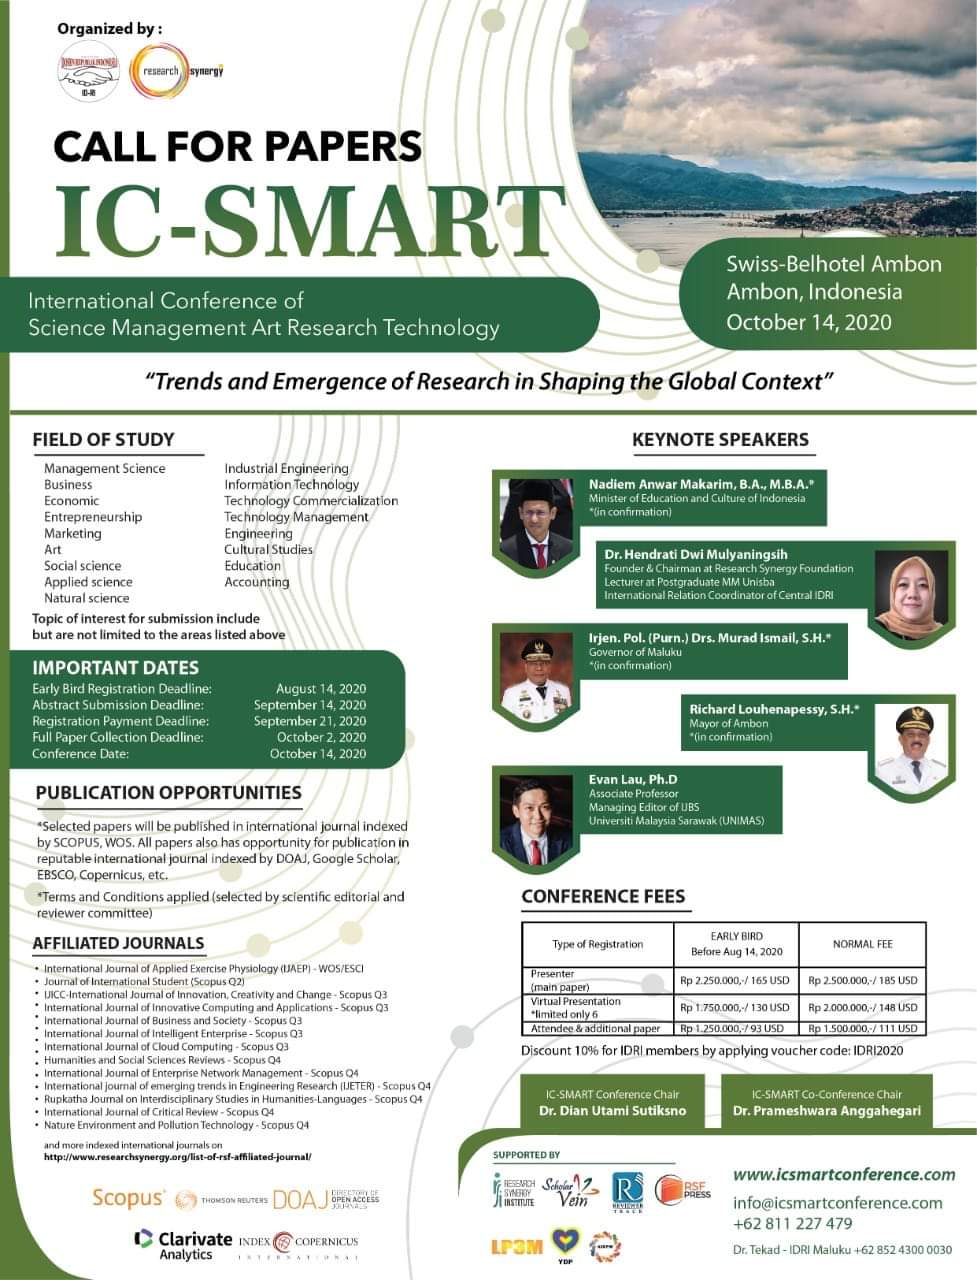 International Conference of Science Management Art Research Technology (IC-SMART)